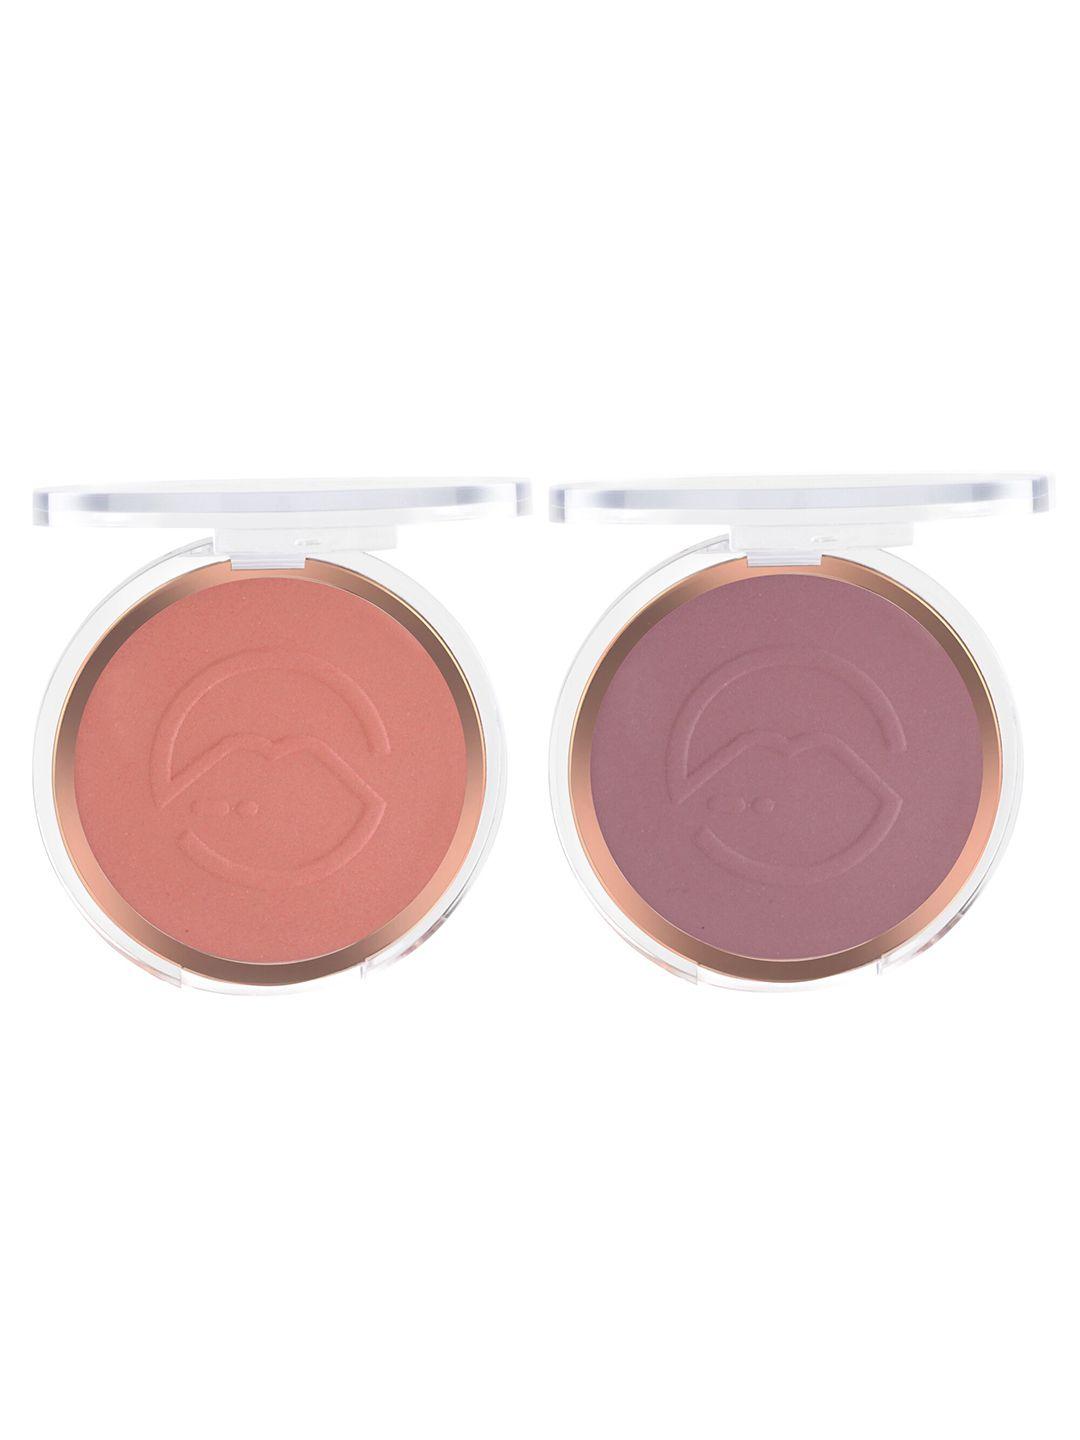 mars set of 2 flush of love highly pigmented matte face blusher - shade 01 & 03